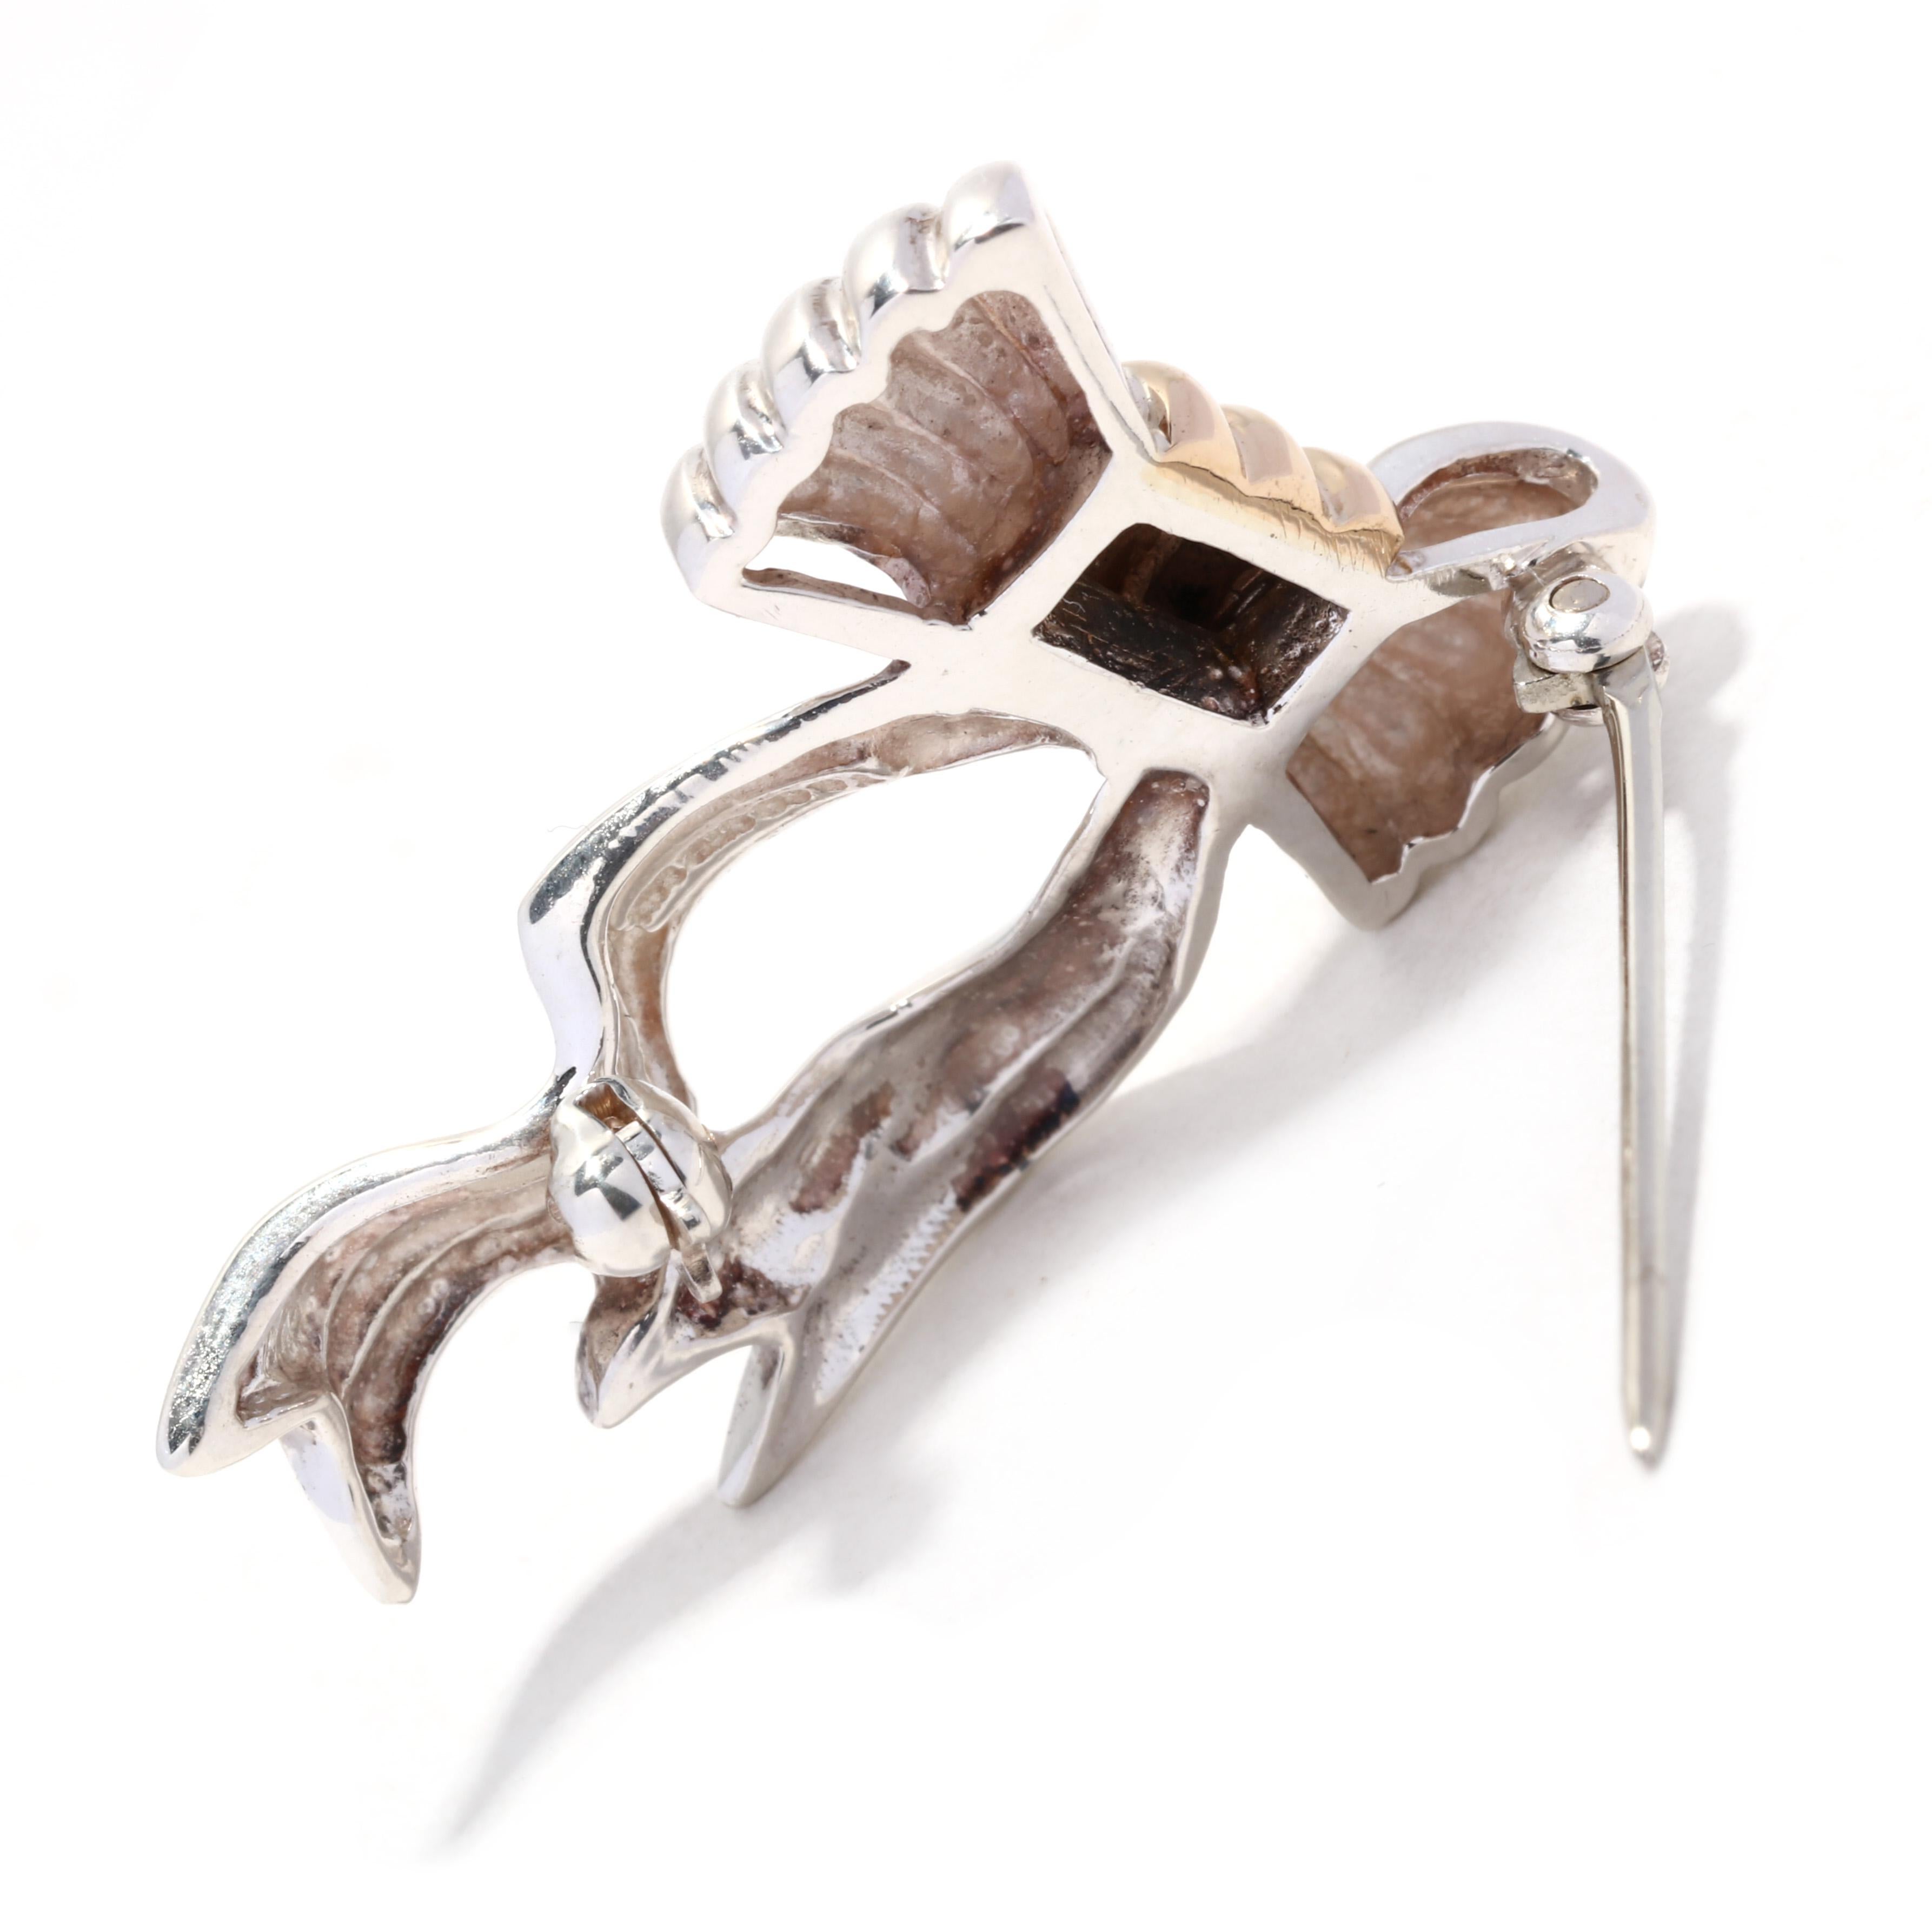 A vintage Tiffany and Company 18 karat yellow gold and sterling silver small bow brooch. This simple bow brooch features flowing box motif with a central yellow gold knot and with ridged detailing.

Length: 1 1/8 in.

Width: 5/8 in.

Weight: 3.3